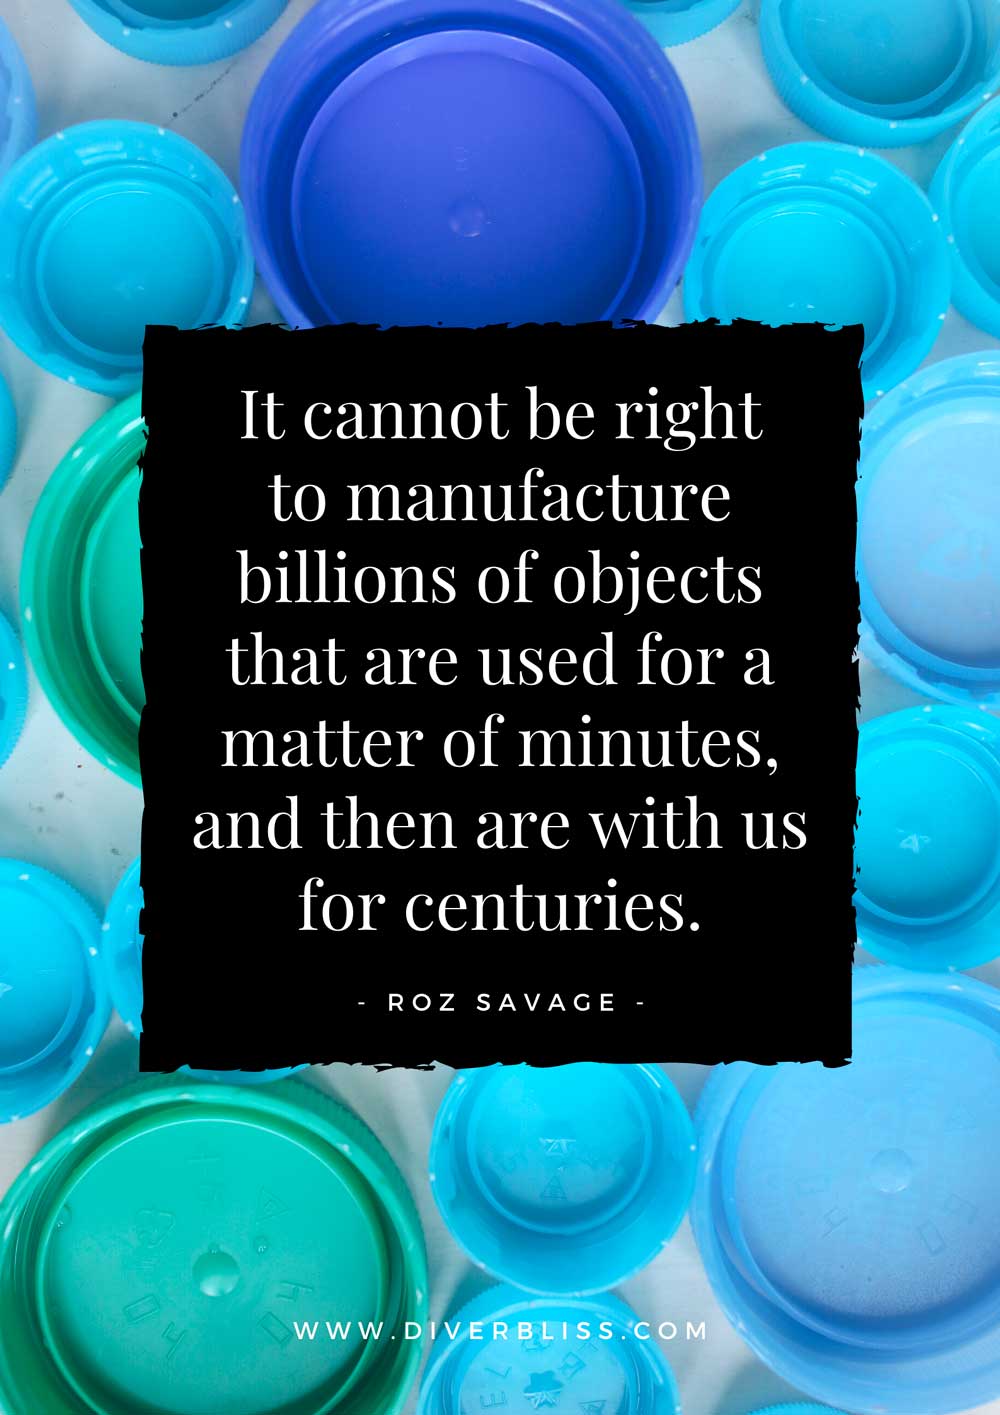 Plastic Pollution Quotes Poster: “It cannot be right to manufacture billions of objects that are used for a matter of minutes, and then are with us for centuries.”–  Roz Savage